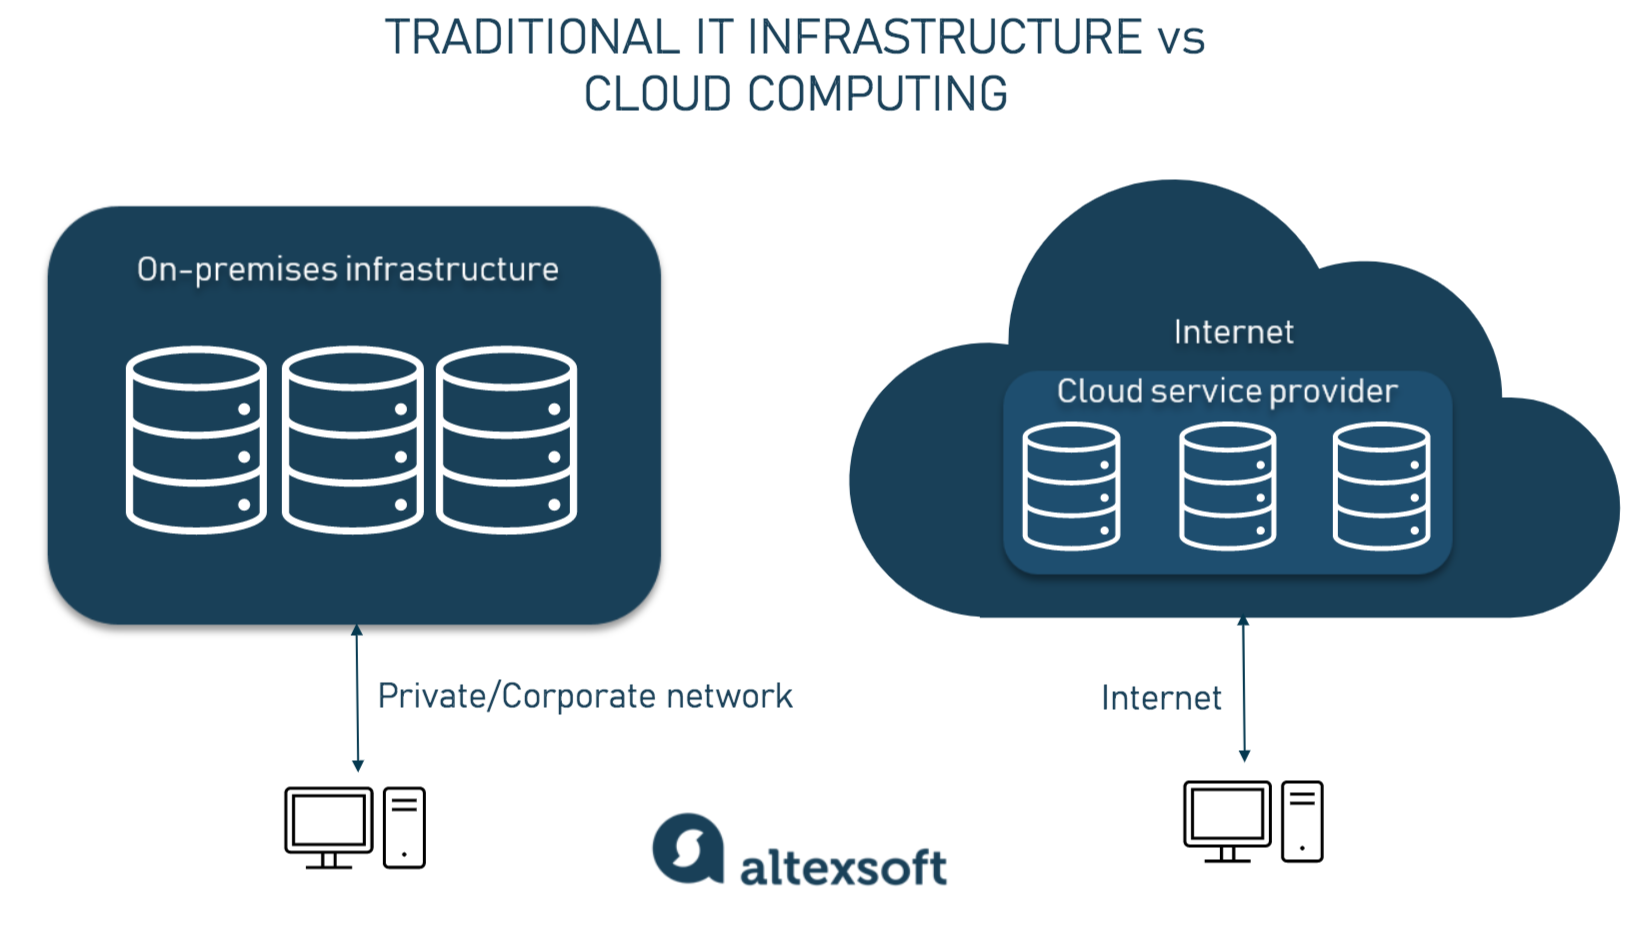 On-premises vs cloud infrastructure at a glance